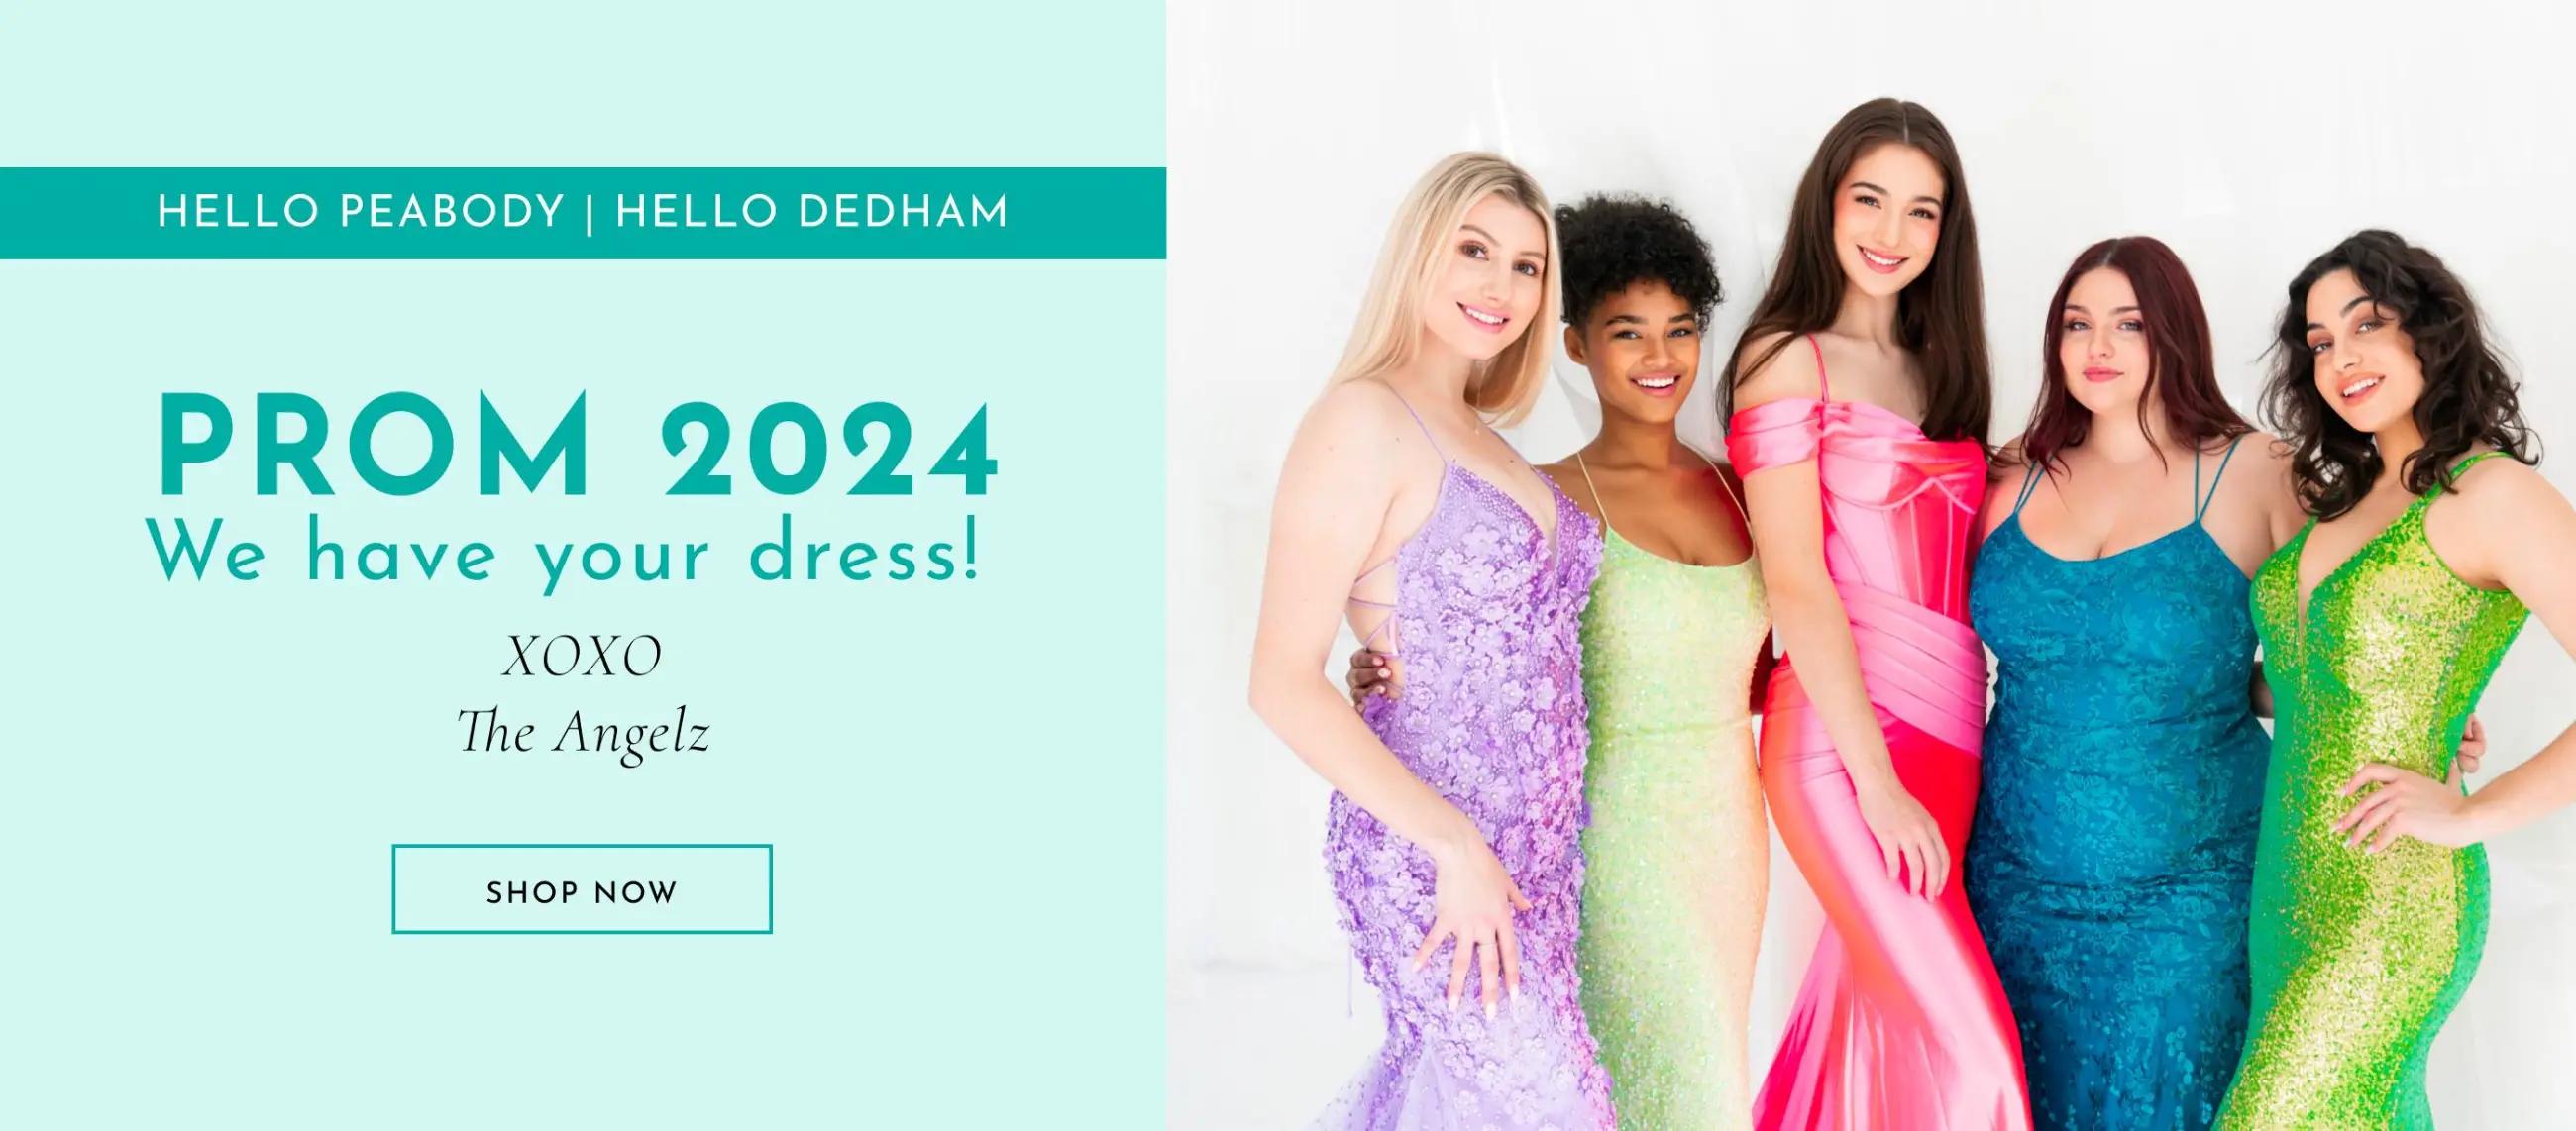 Prom dresses 2024 at The Ultimate Prom & Bridal